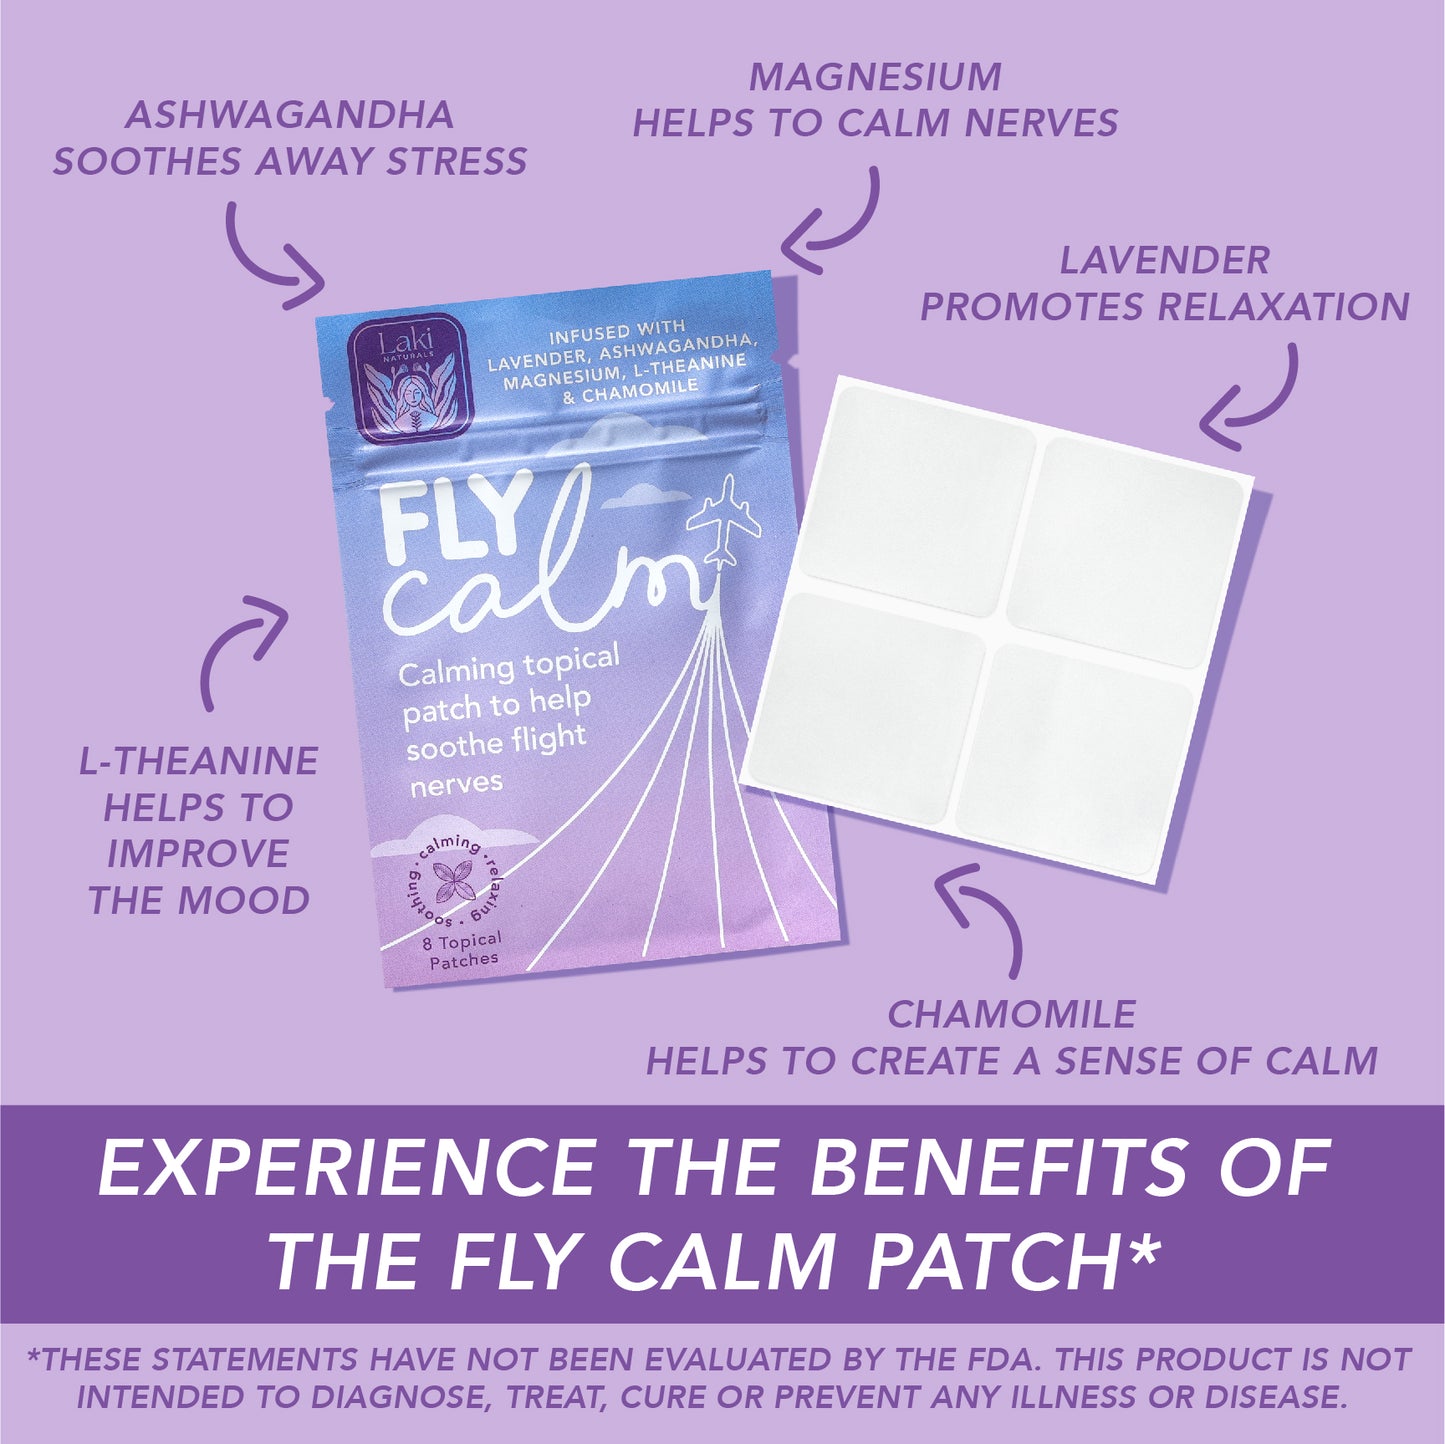 Fly Calm Patch - Laki Naturals